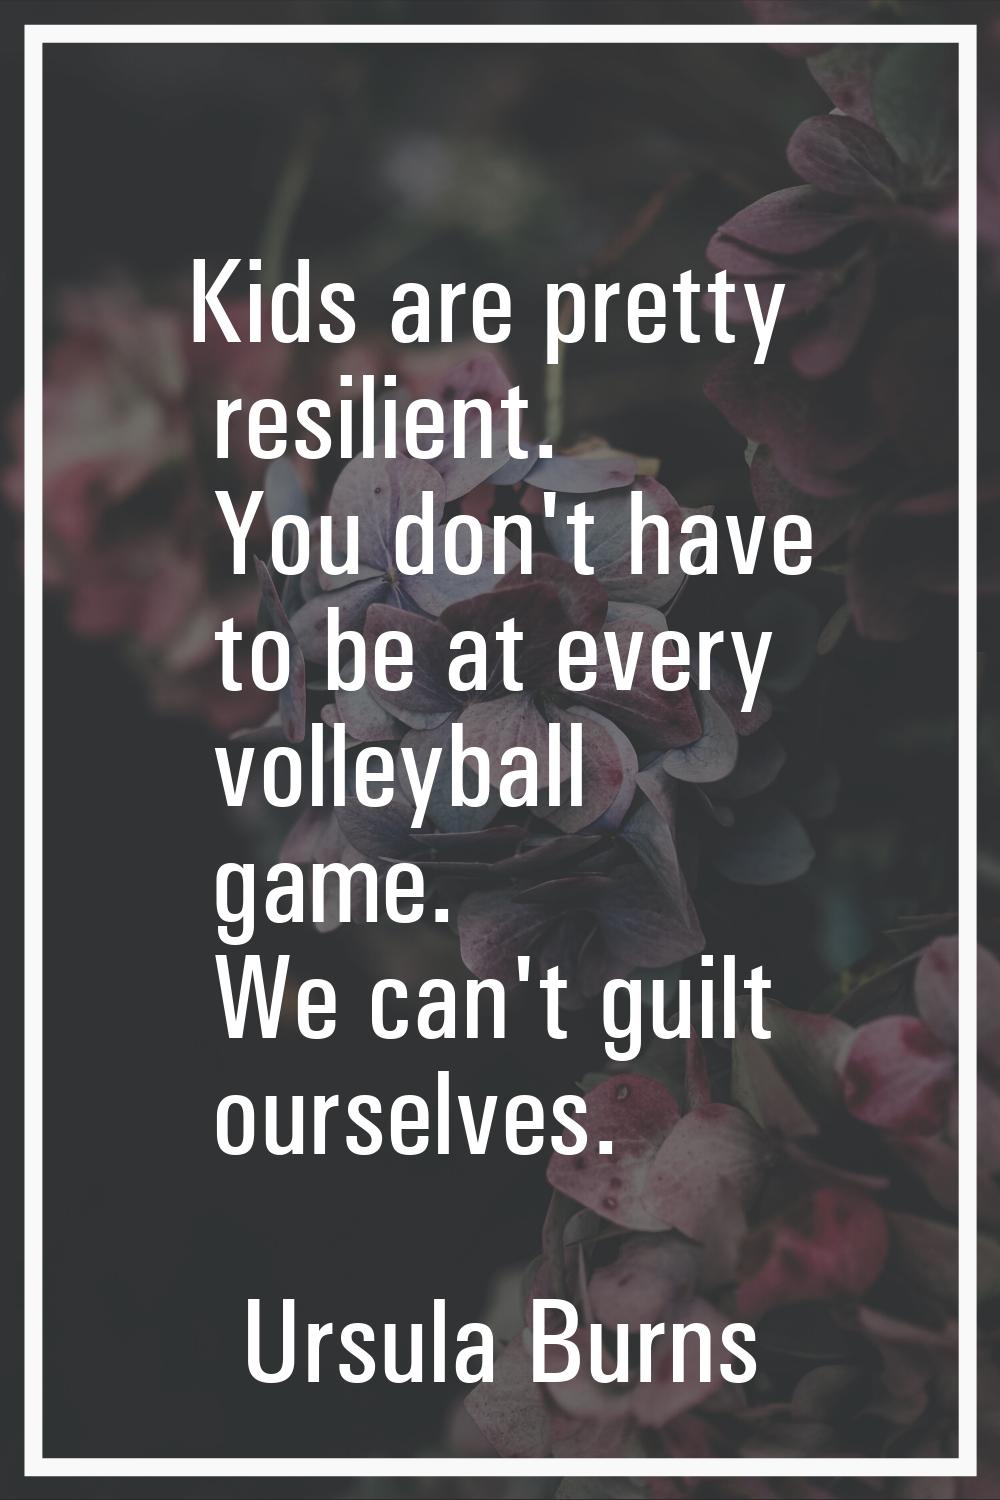 Kids are pretty resilient. You don't have to be at every volleyball game. We can't guilt ourselves.